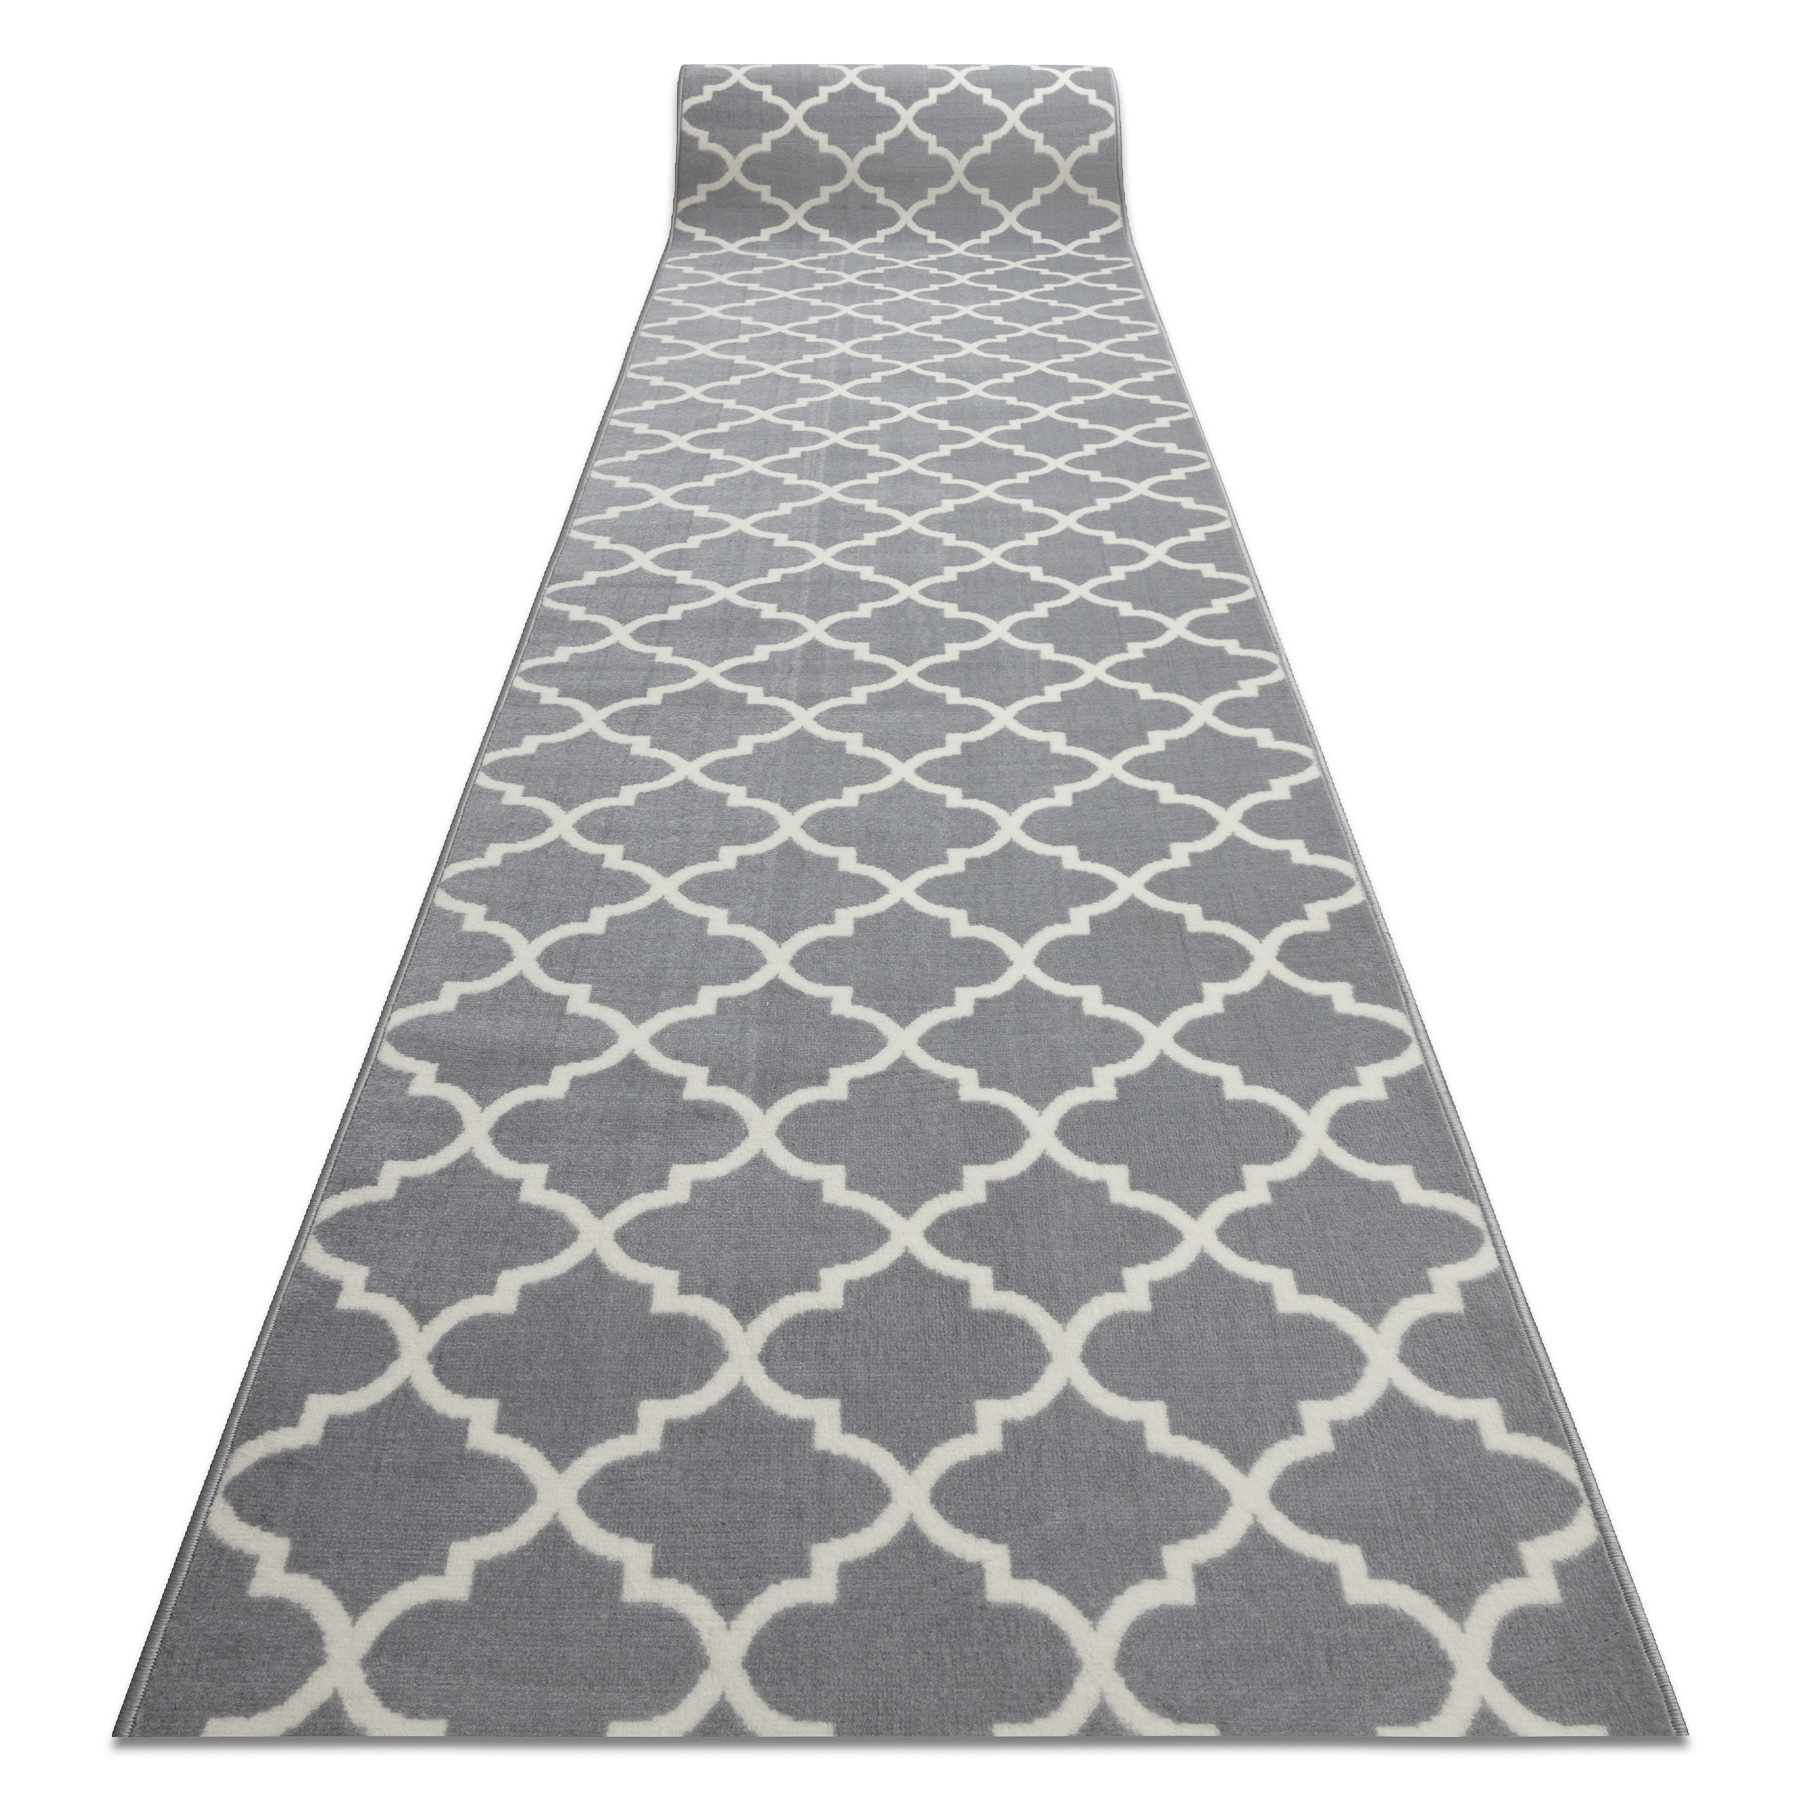 Hall/escaliers Zigzag Tapis Runner toute taille x 60 cm 4 Couleurs Tapis Runner 